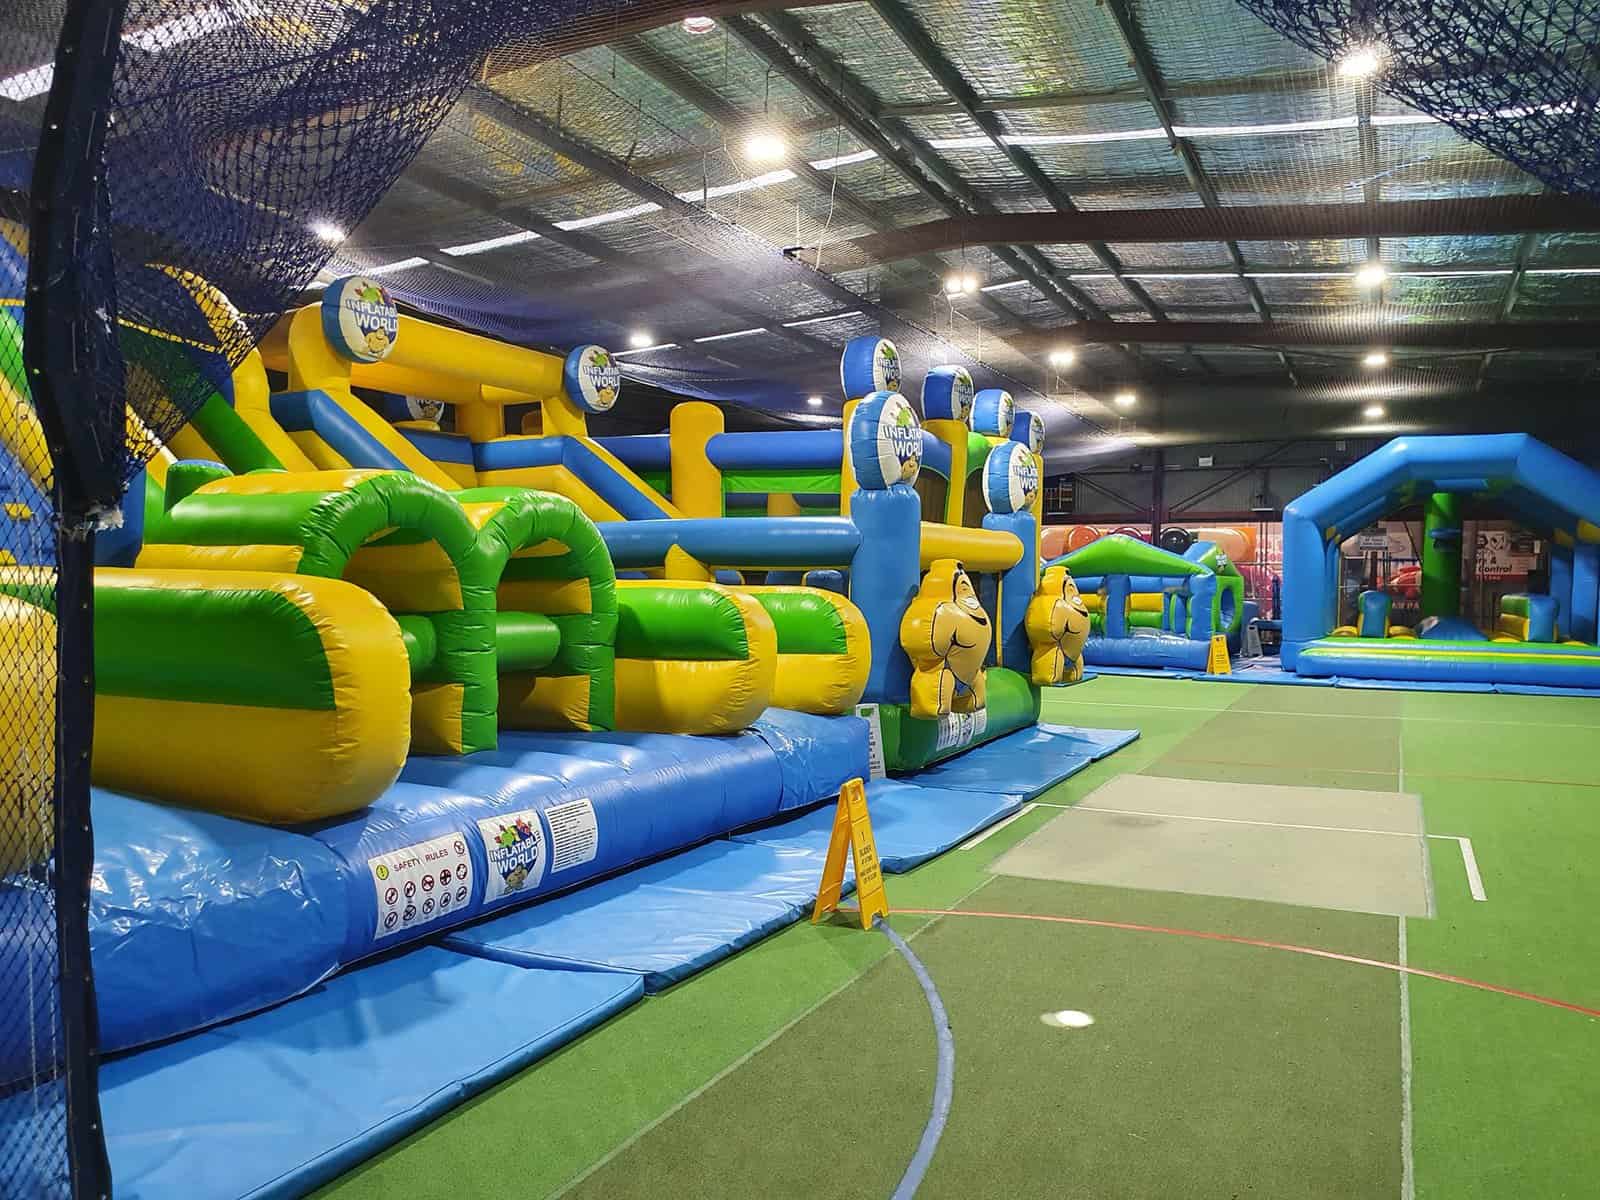 Inflatable World Mandurah is one of the best kids activities around. A fabulous indoor playground and play centre!